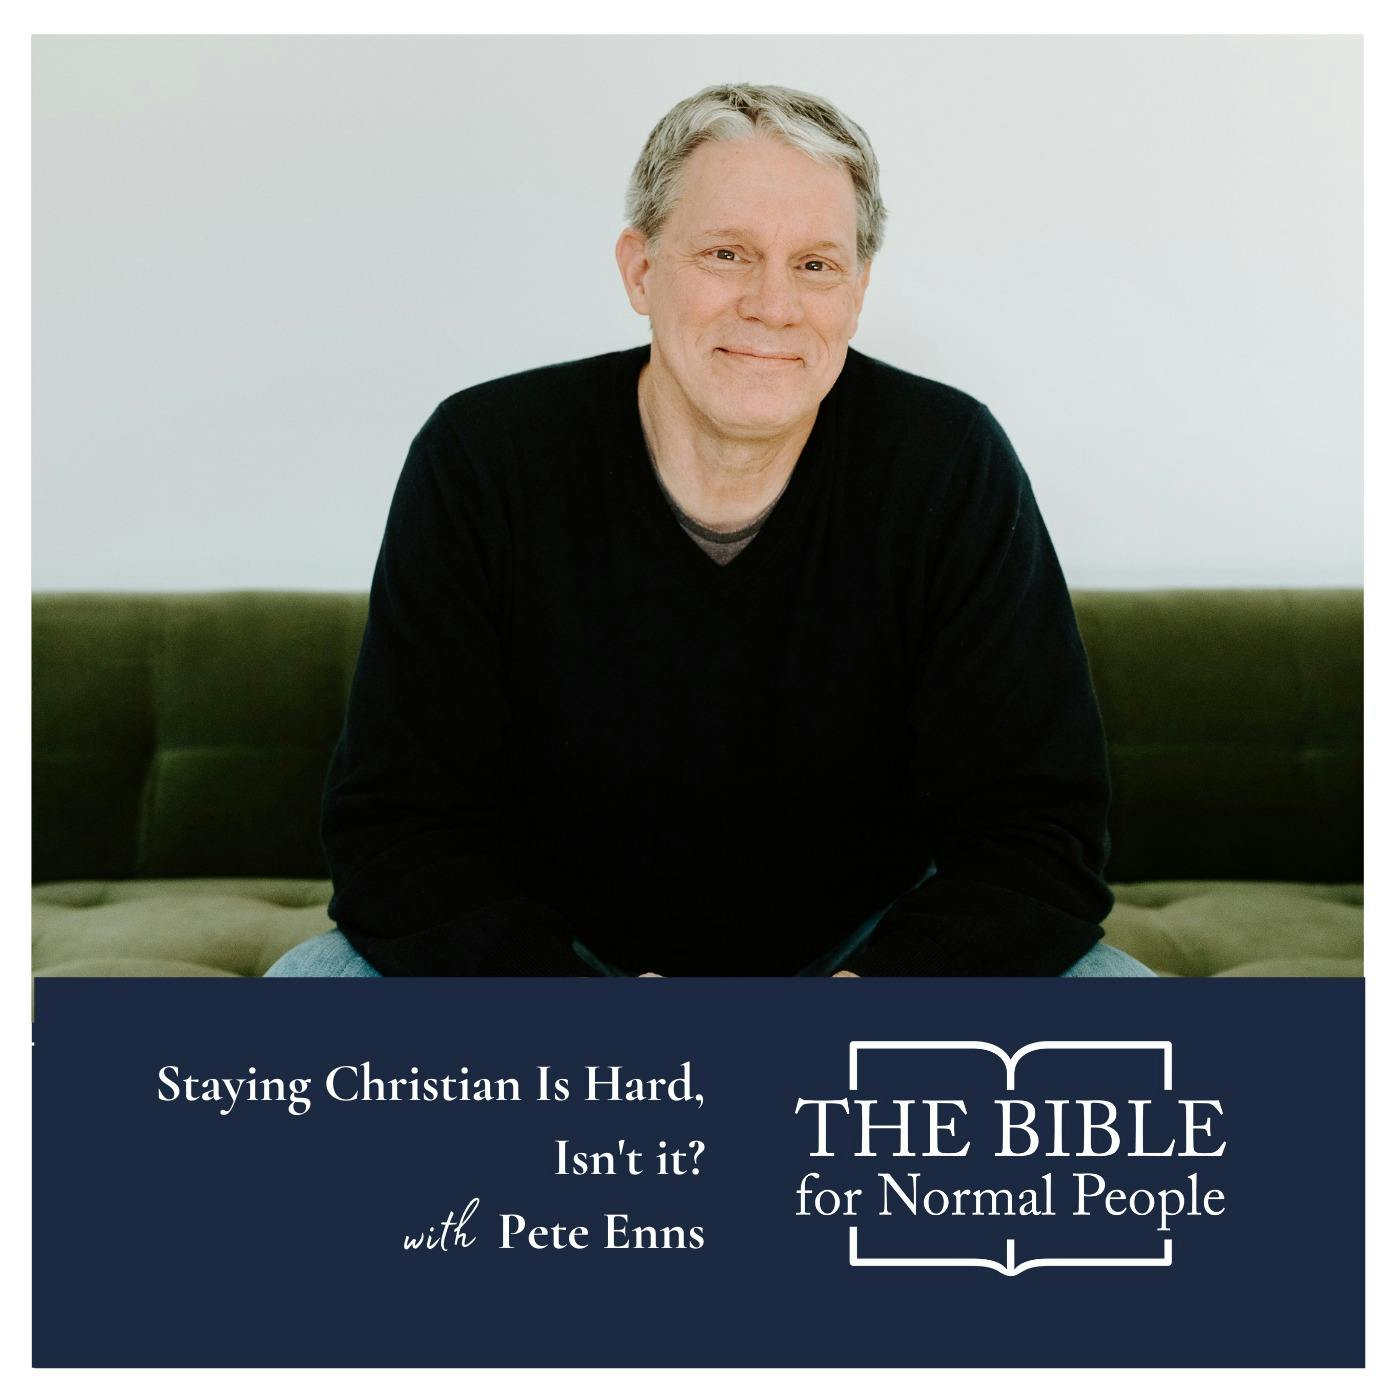 Episode 194: Pete Enns - Staying Christian Is Hard, Isn't It?